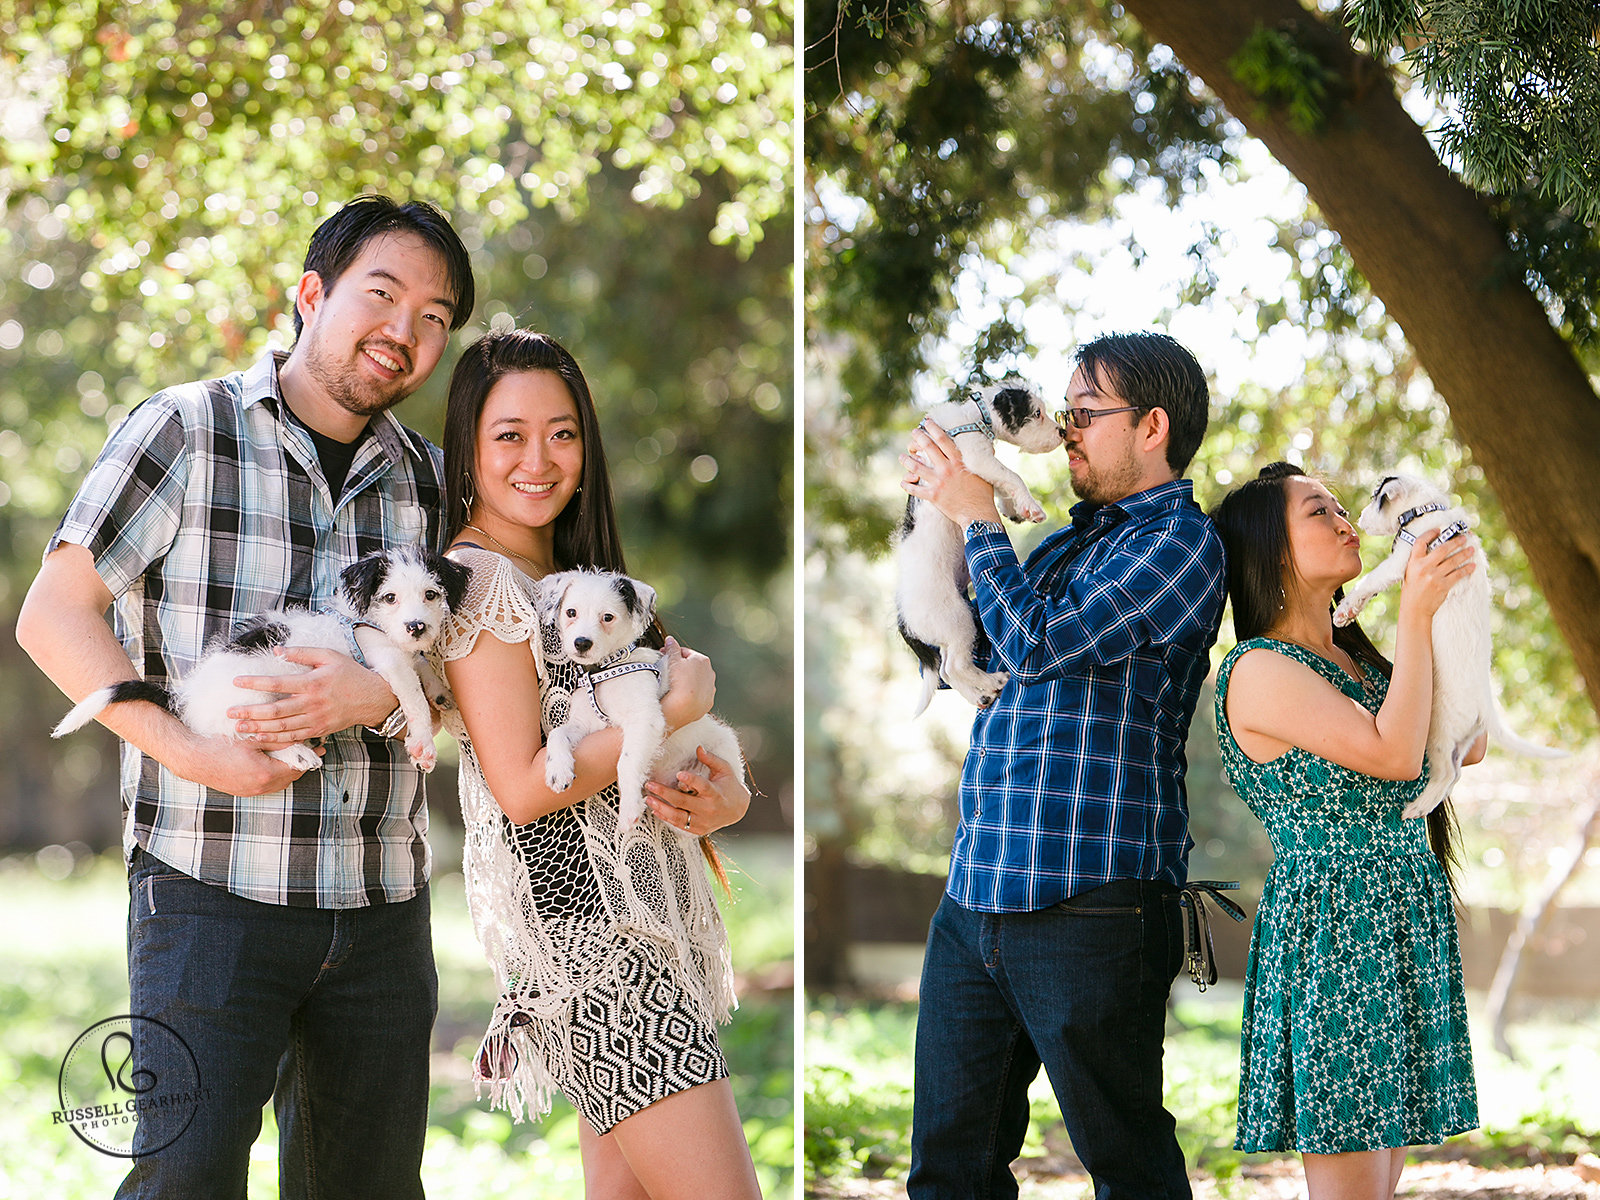 Pasadena Outdoor Park Engagement Portraits – Russell Gearhart Photography – www.gearhartphoto.com